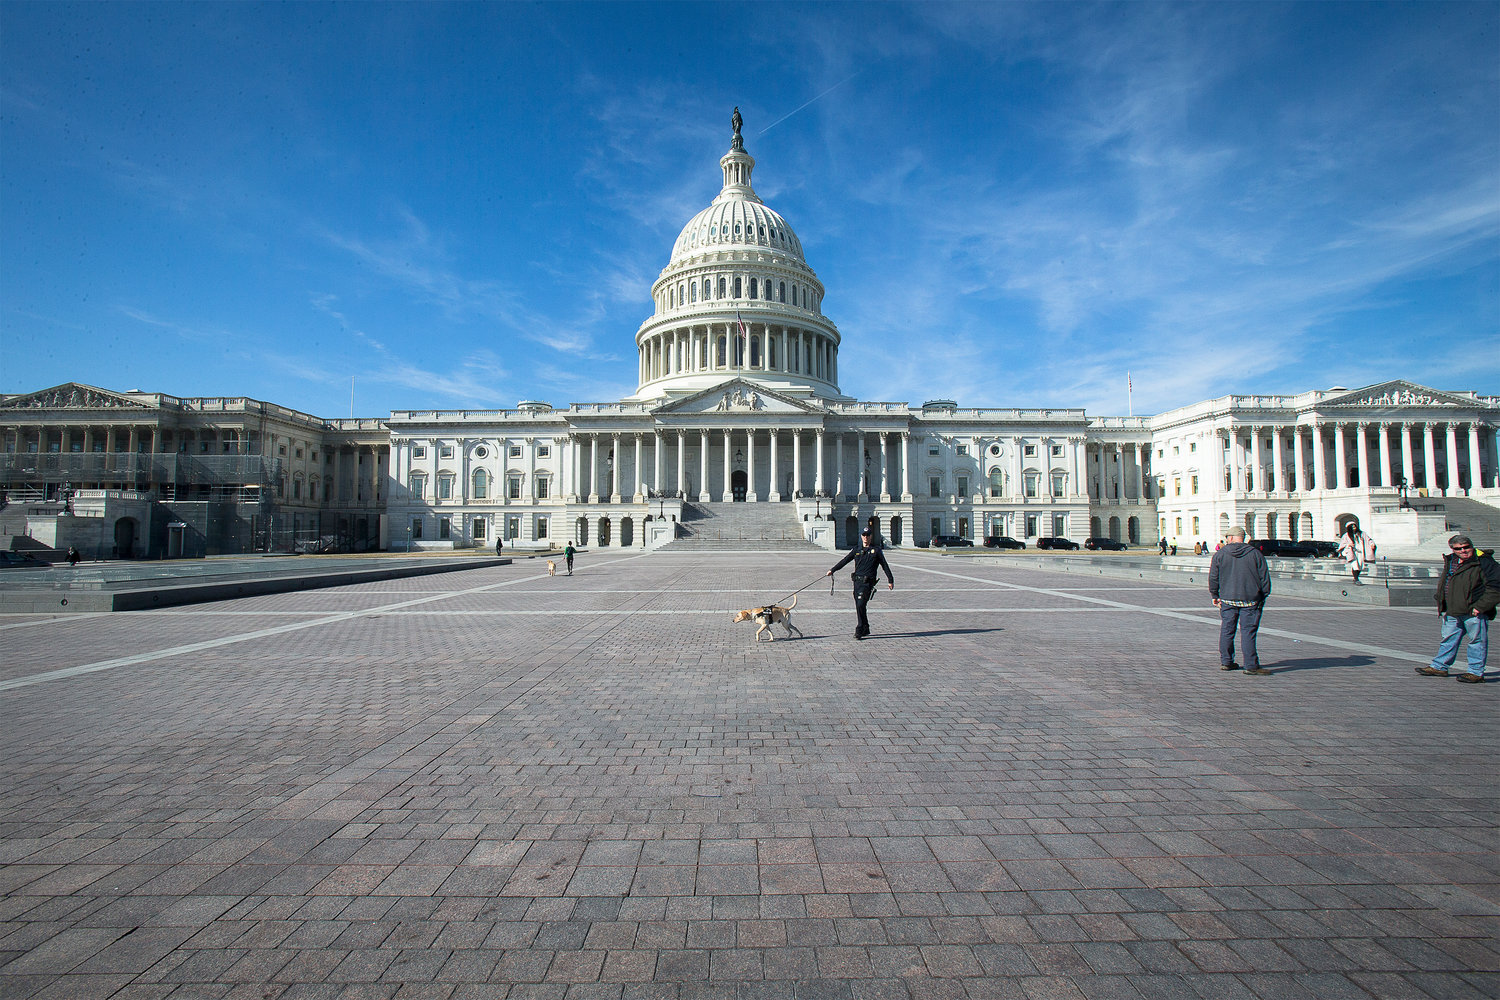 The U.S. Capitol is seen in Washington Feb. 5, 2019. Five U.S. bishops, chairmen of U.S. Conference of Catholic Bishops’ committees or subcommittees, said May 17 they were “gravely disappointed” with the U.S. House of Representatives passage of the Equality Act.